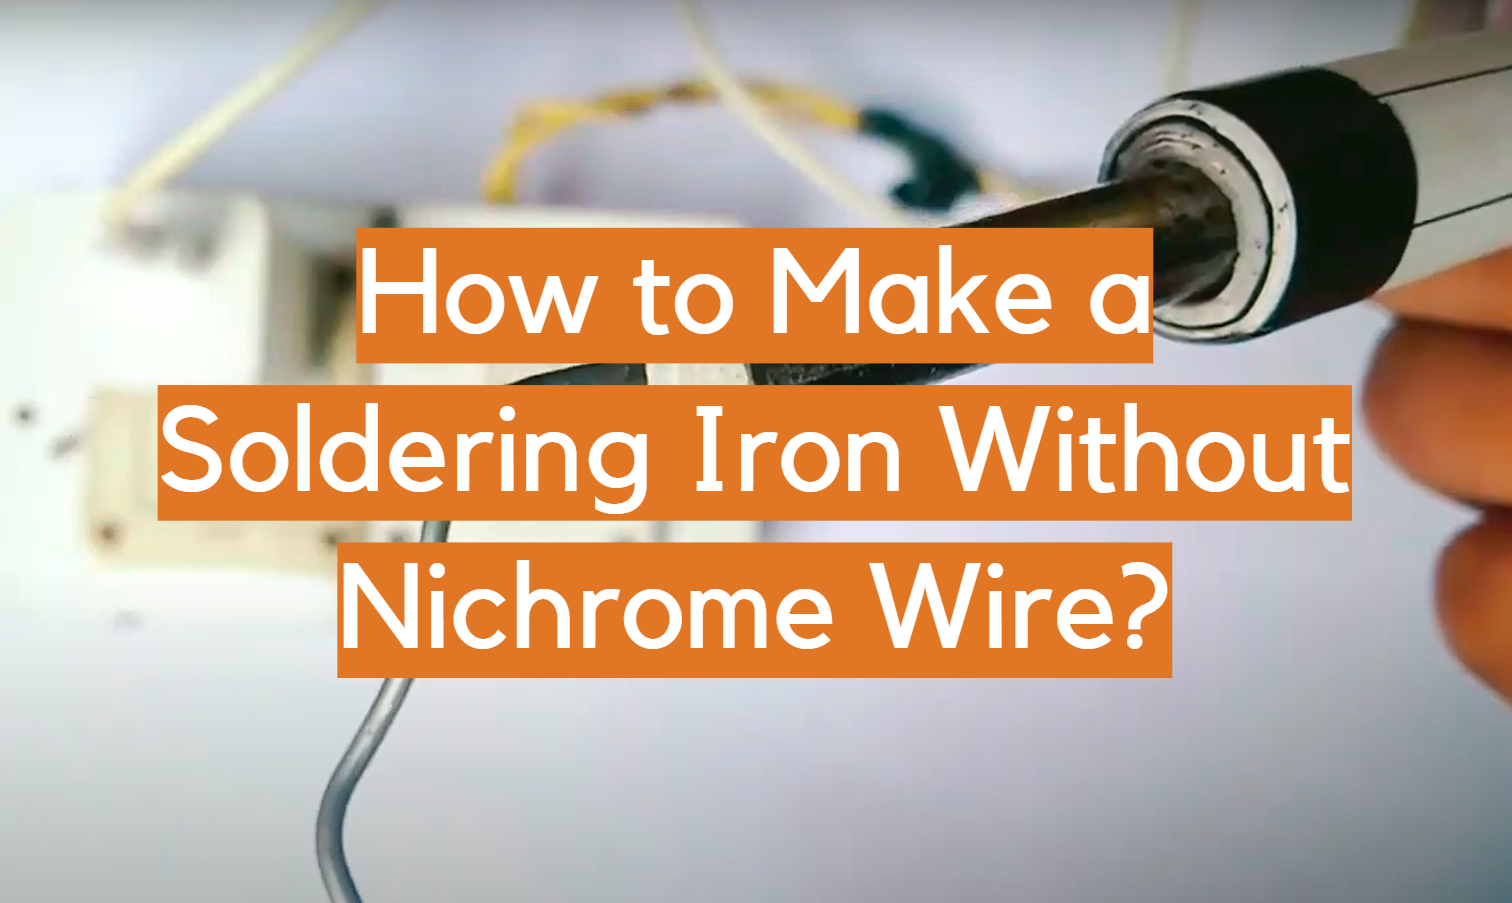 How to Make a Soldering Iron Without Nichrome Wire?